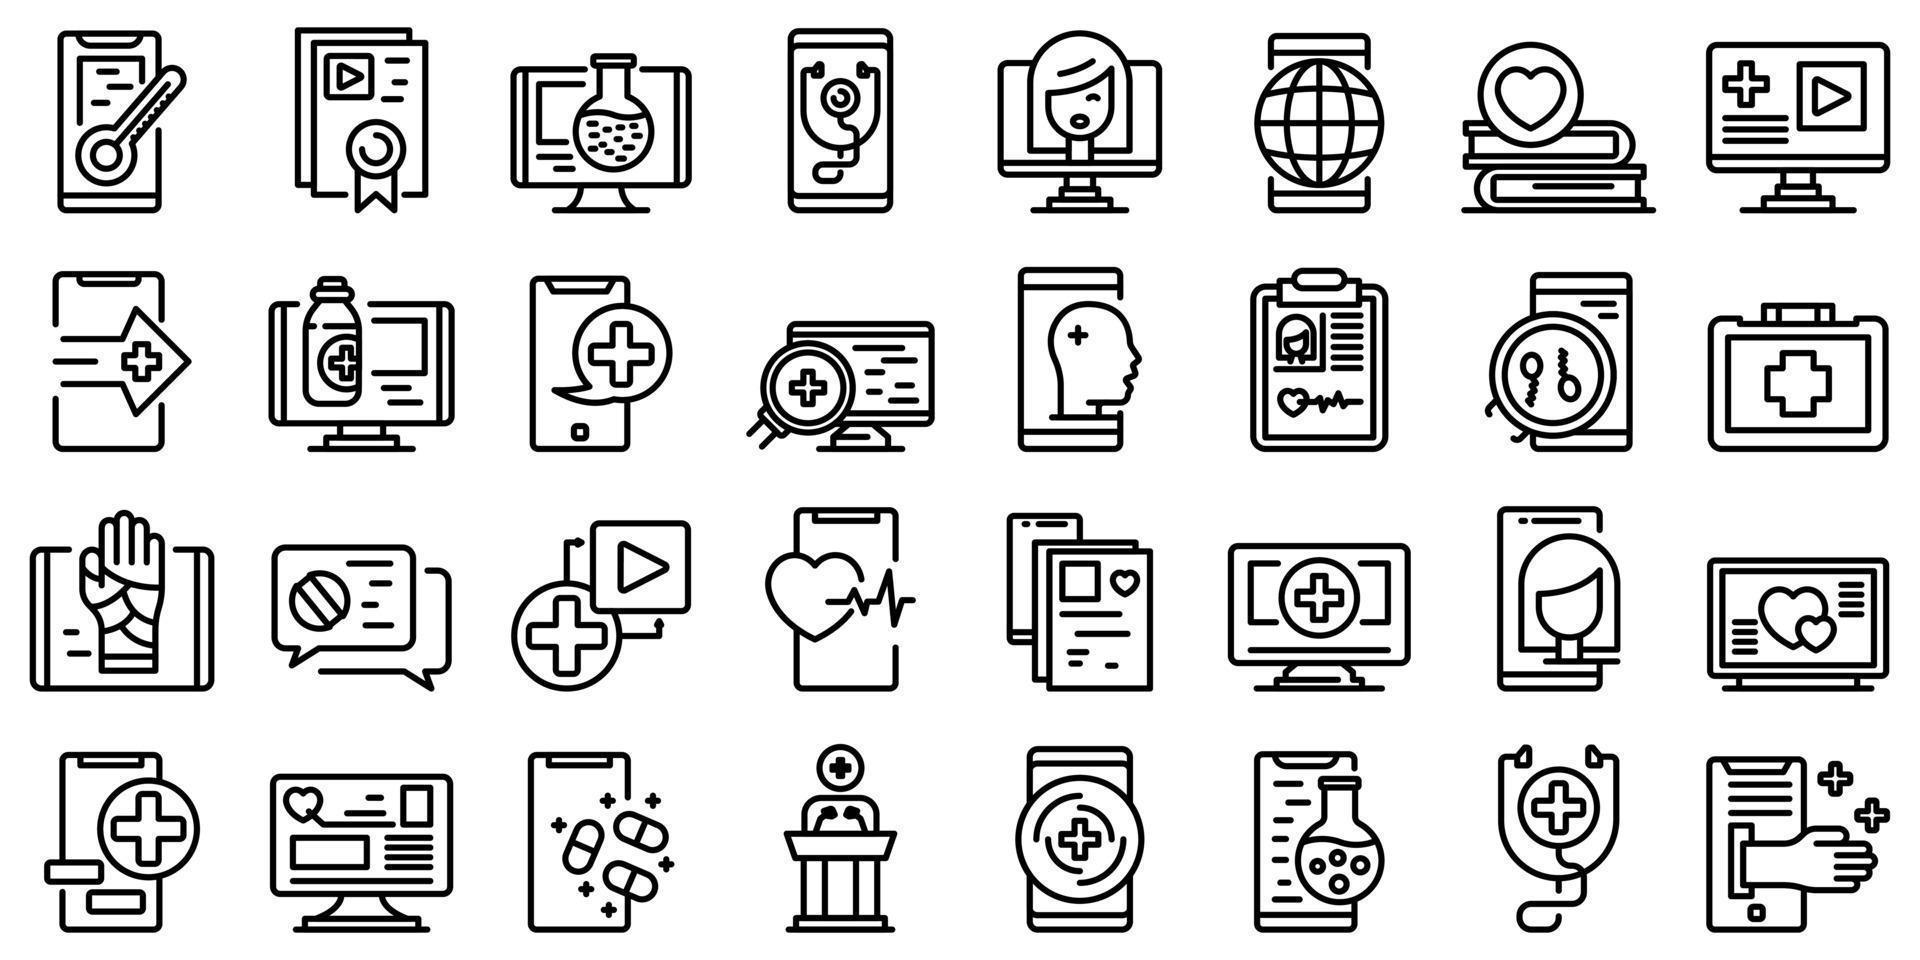 Telemedicine icons set, outline style vector